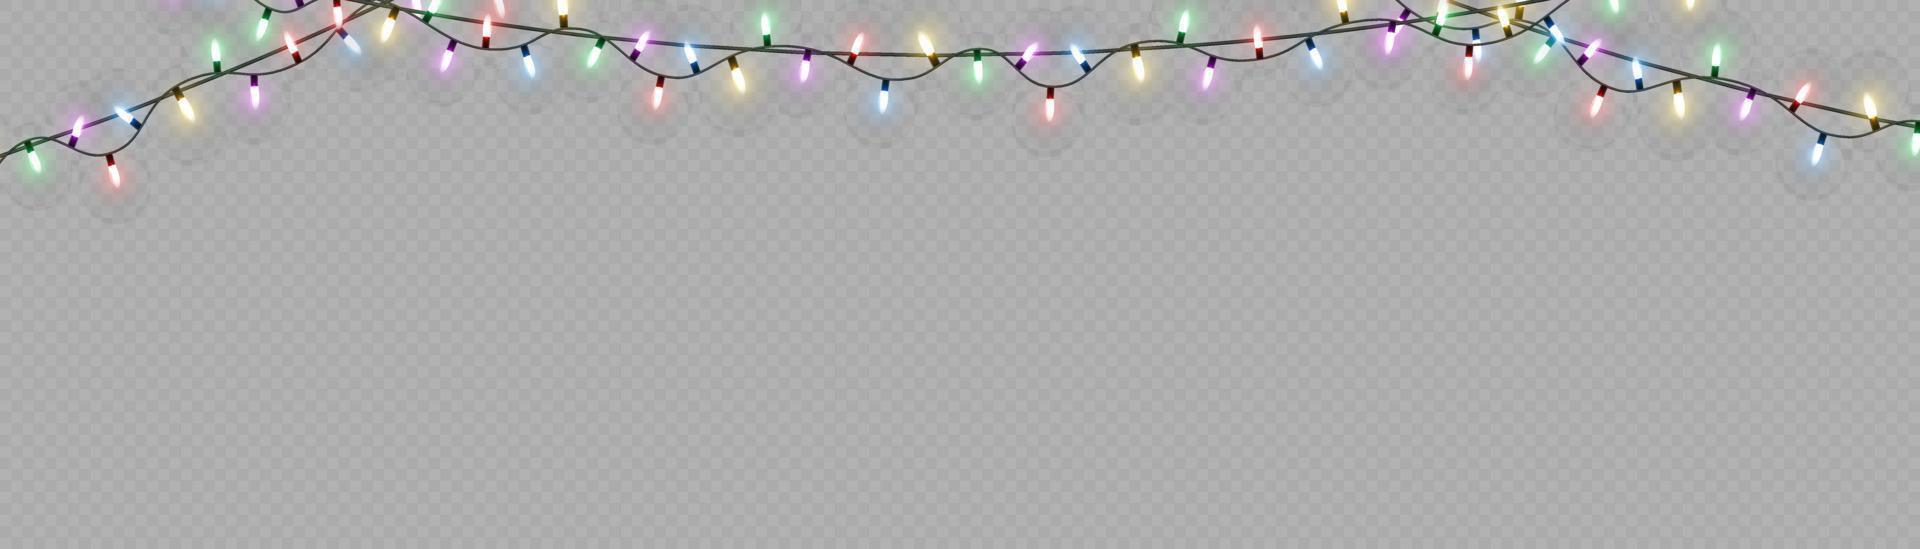 Christmas lights. Vector line with glowing light bulbs.Set of golden xmas glowing garland Led neon lamp illustration. Christmas lights isolated on transparent background for cards, banners, posters